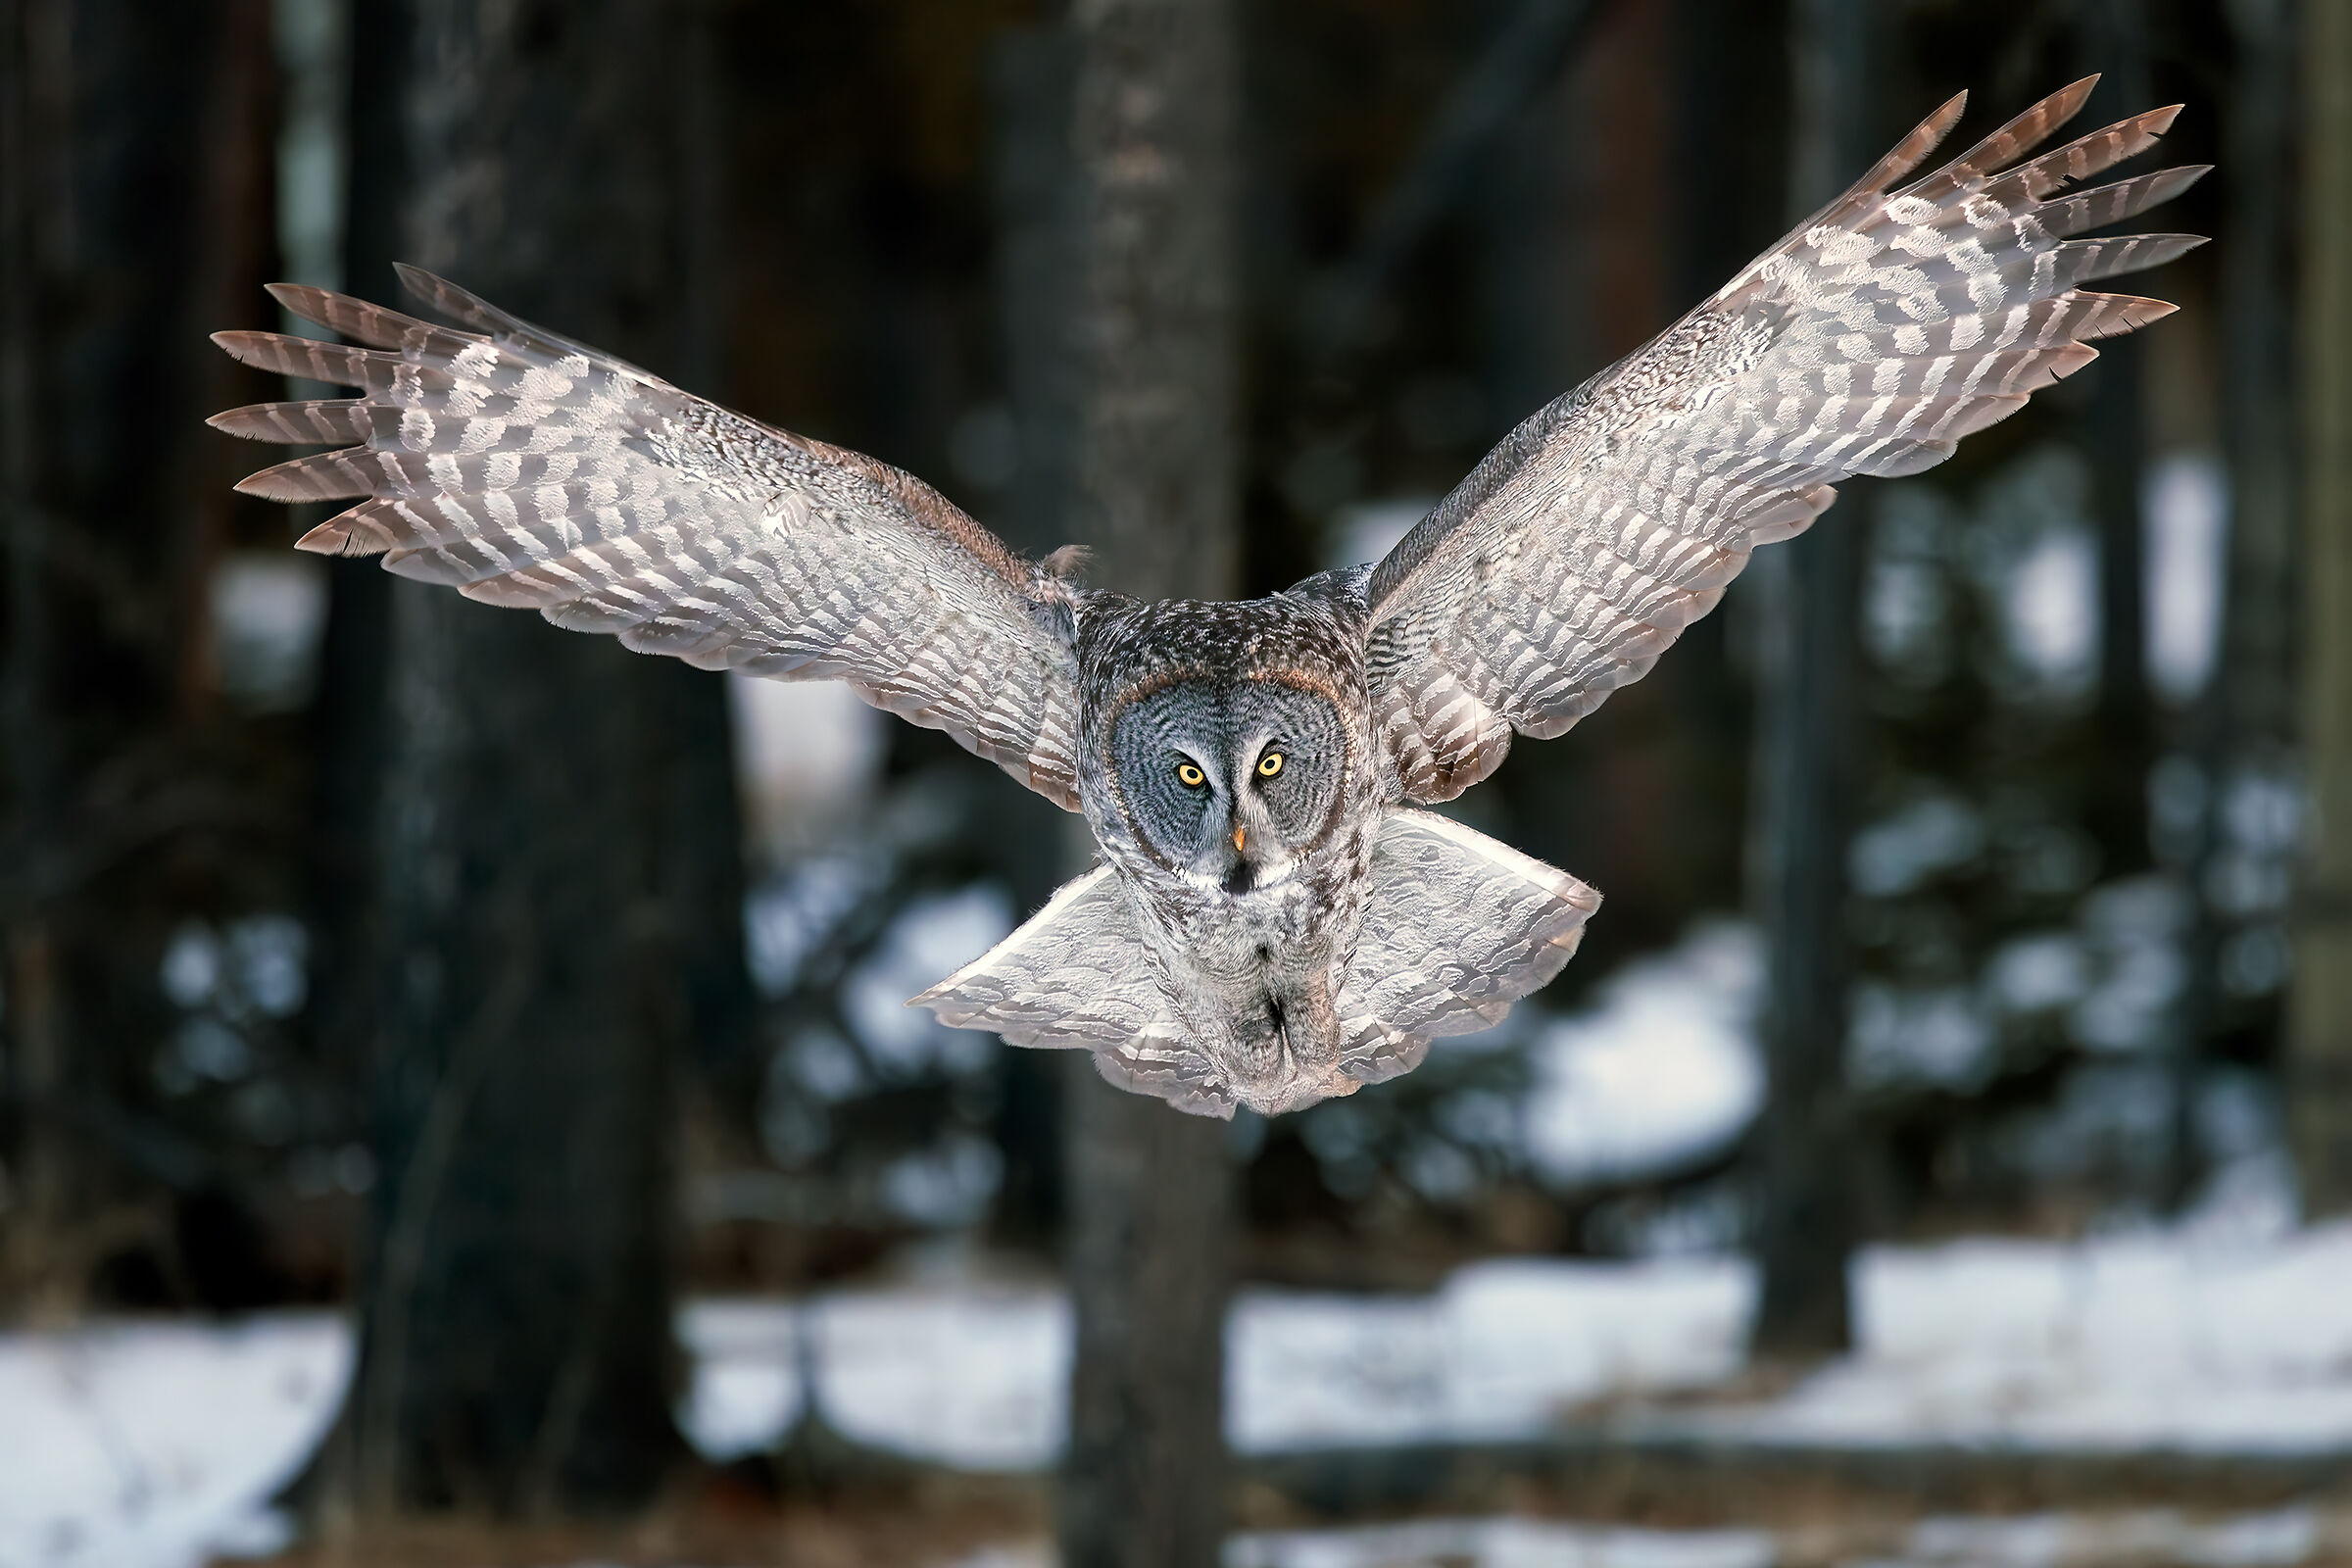 Lapland Owl on the hunt...